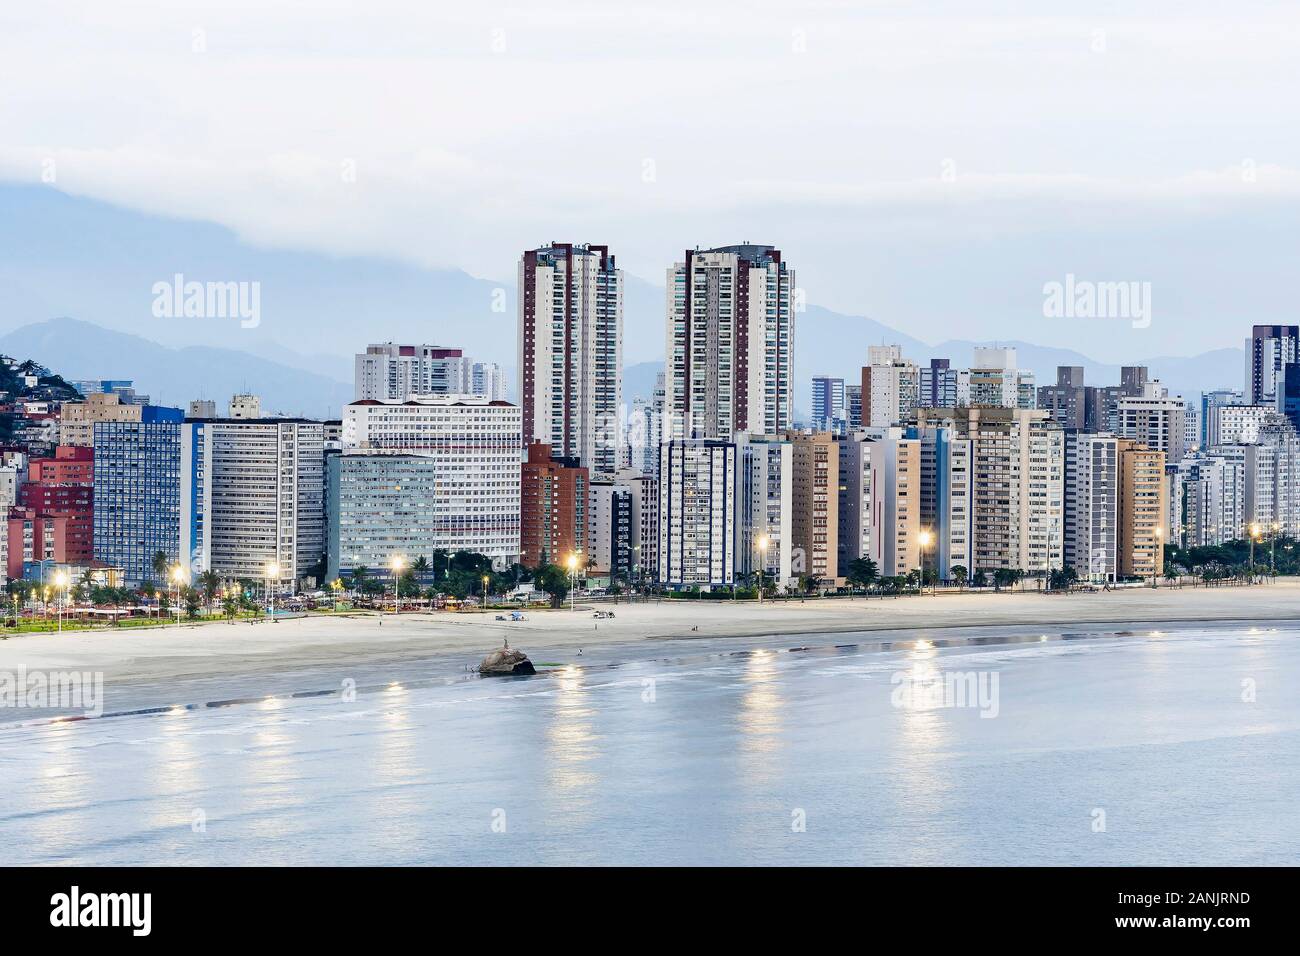 Coastal city at dusk, when the lights of the city begin to turn on. Paulista coast, border between Sao Vicente city and Santos city, SP Brazil. Stock Photo